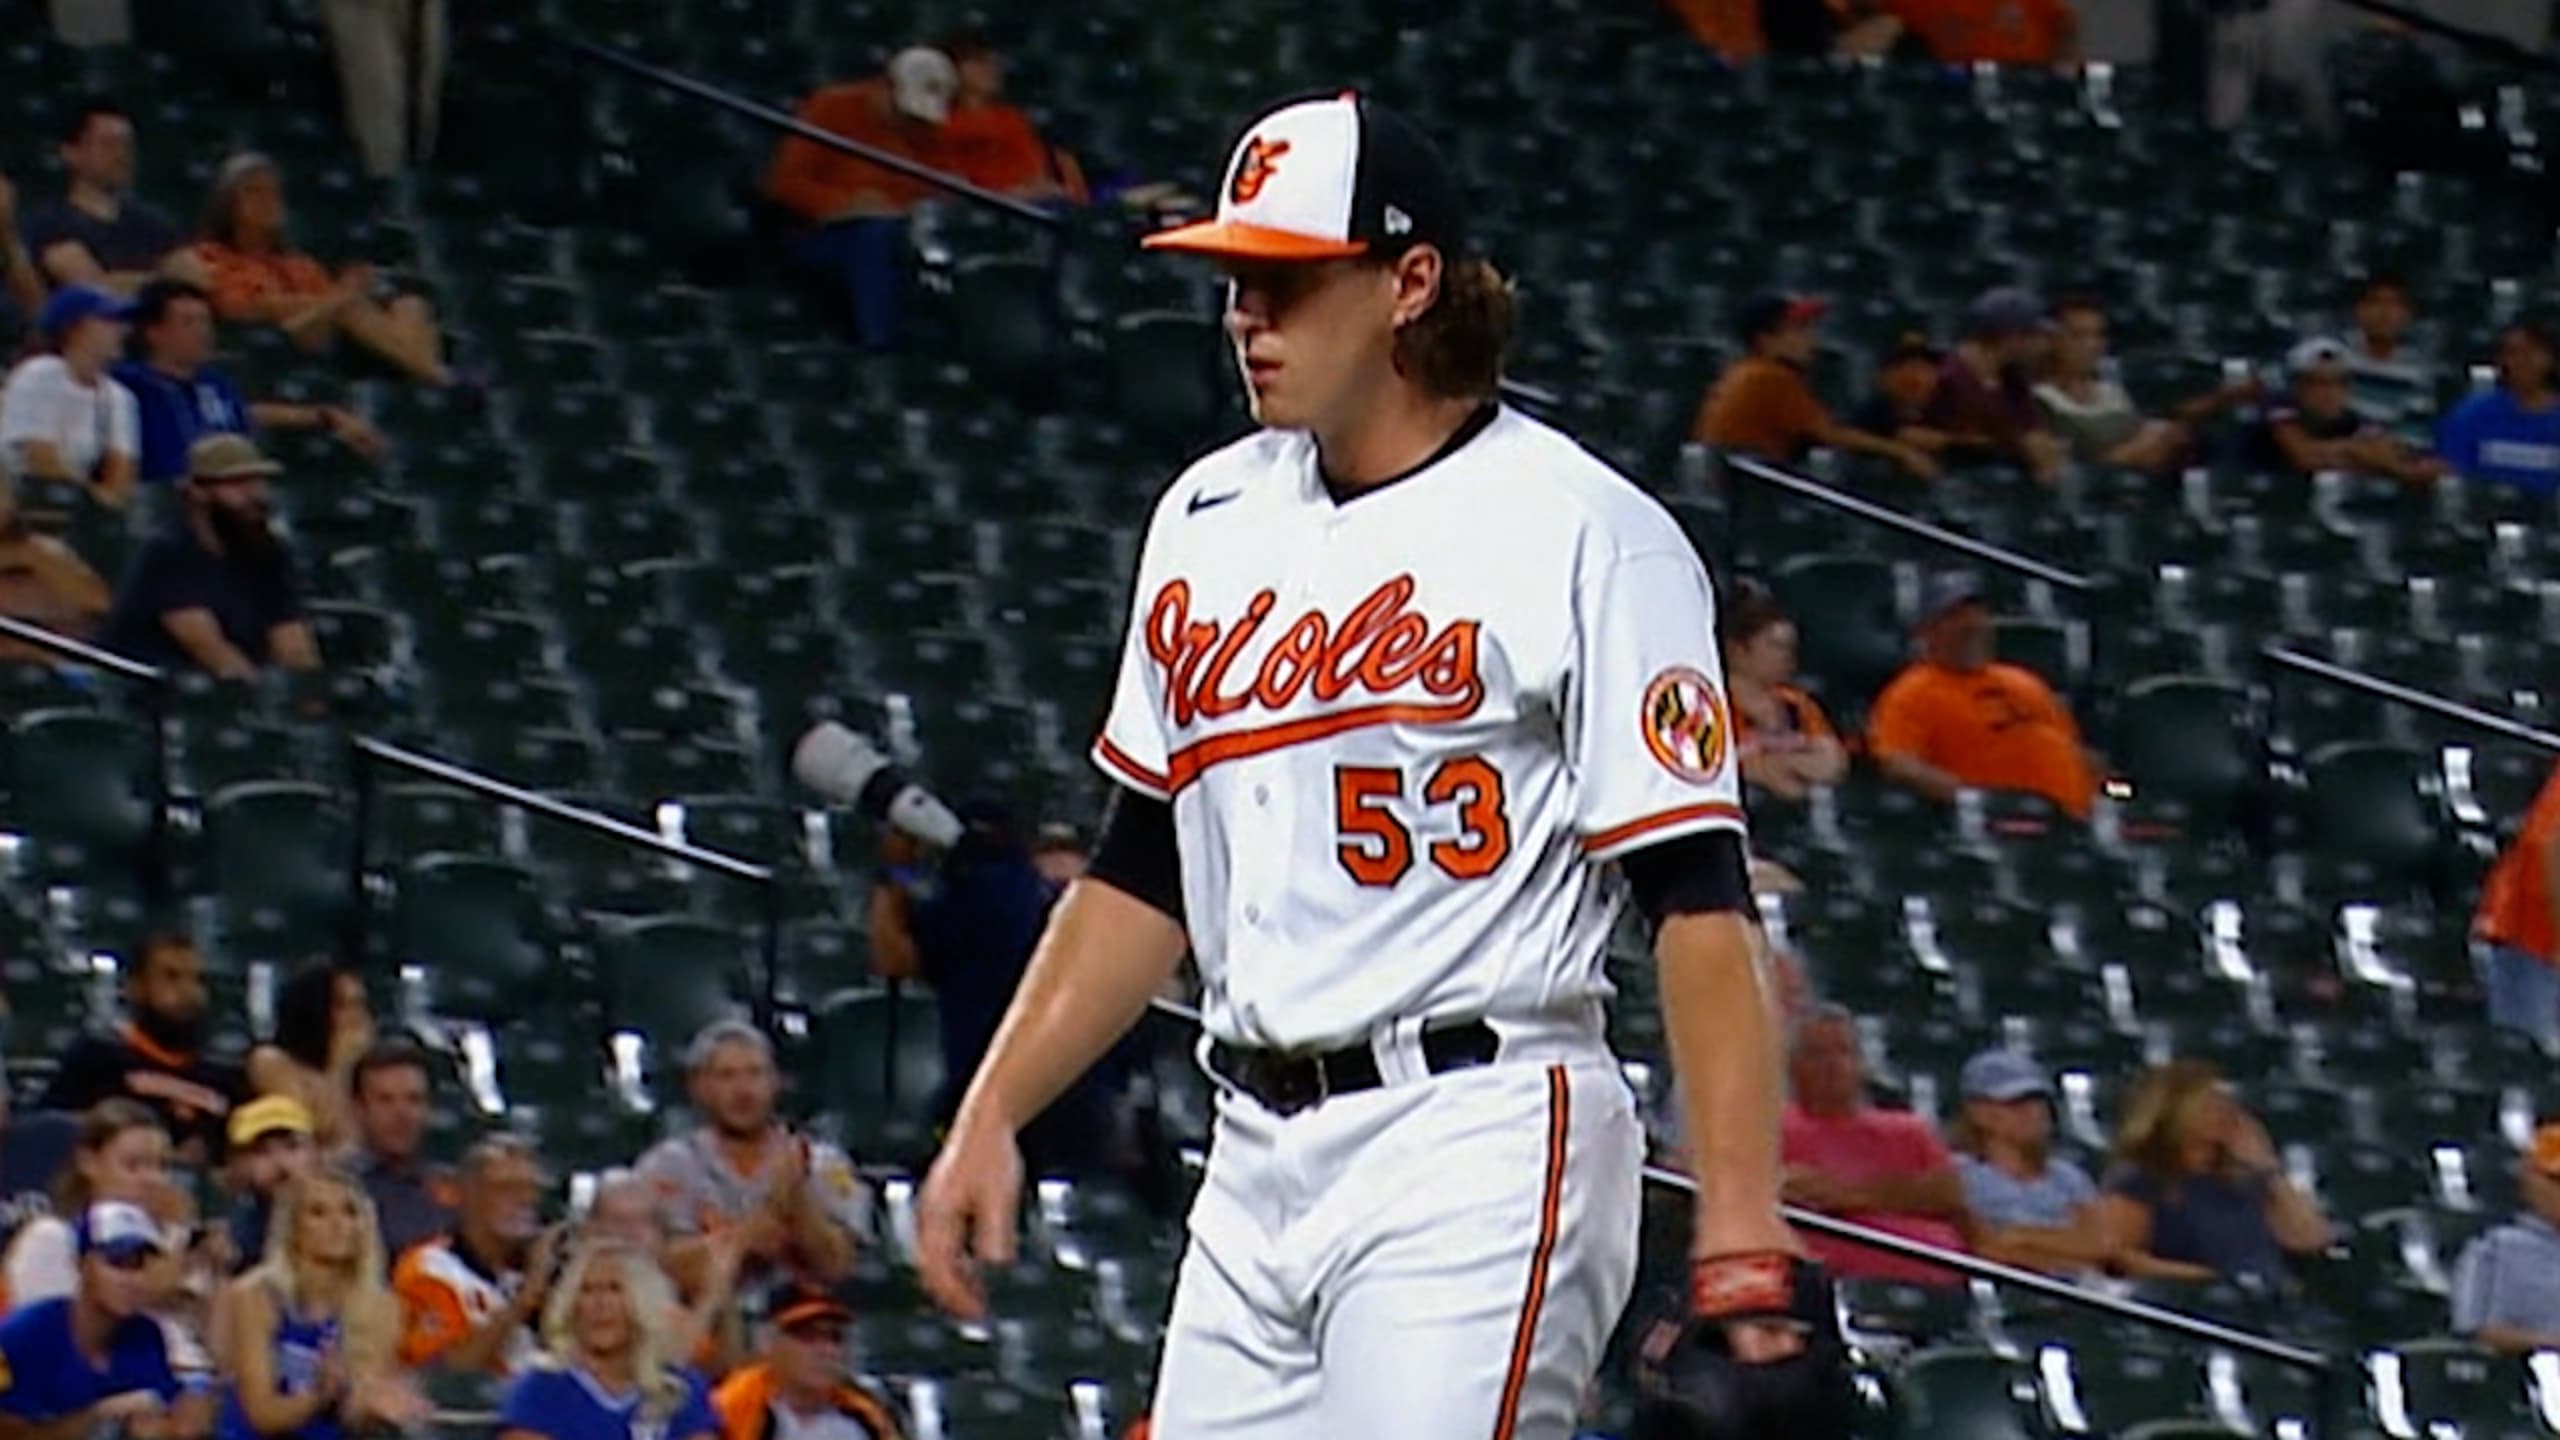 Mike Baumann learning to thrive out of Orioles' bullpen - The